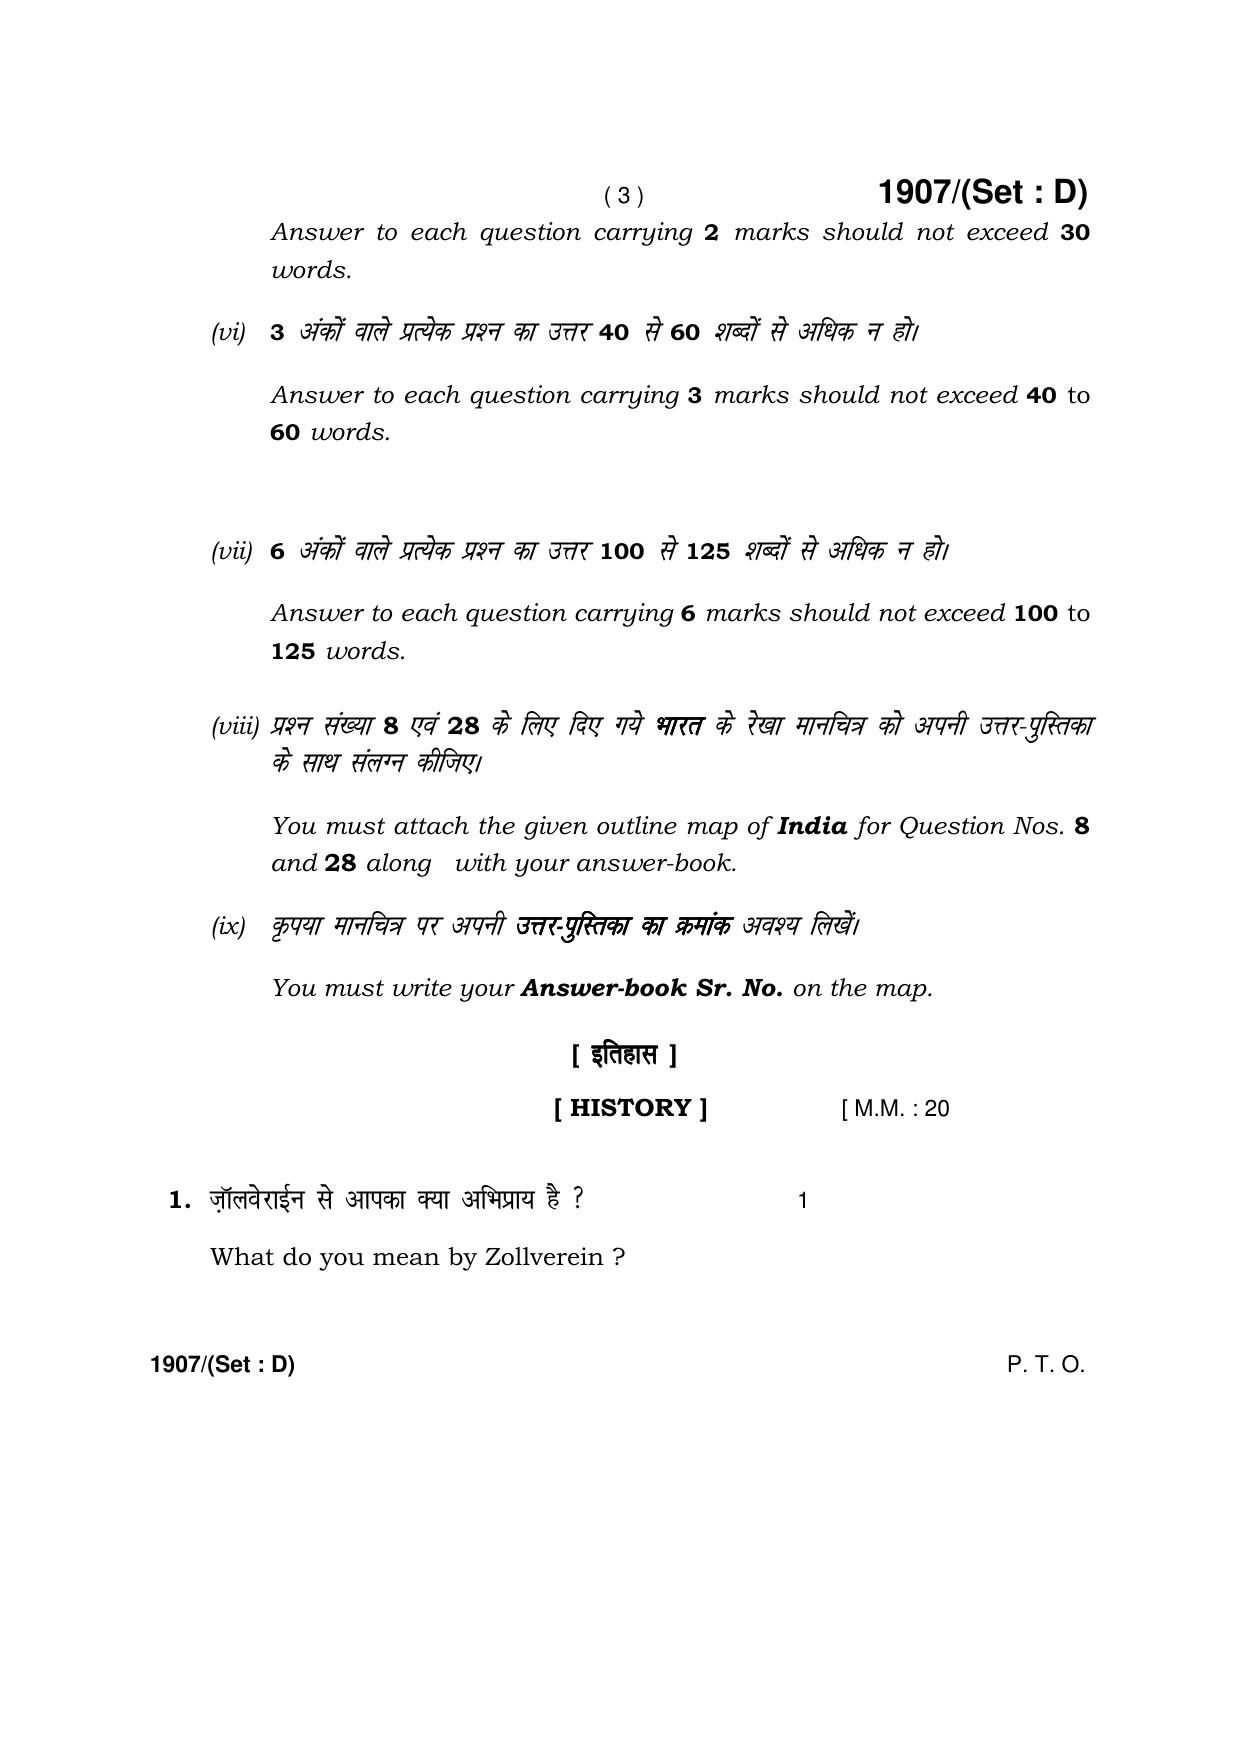 Haryana Board HBSE Class 10 Social Science -D 2017 Question Paper - Page 3